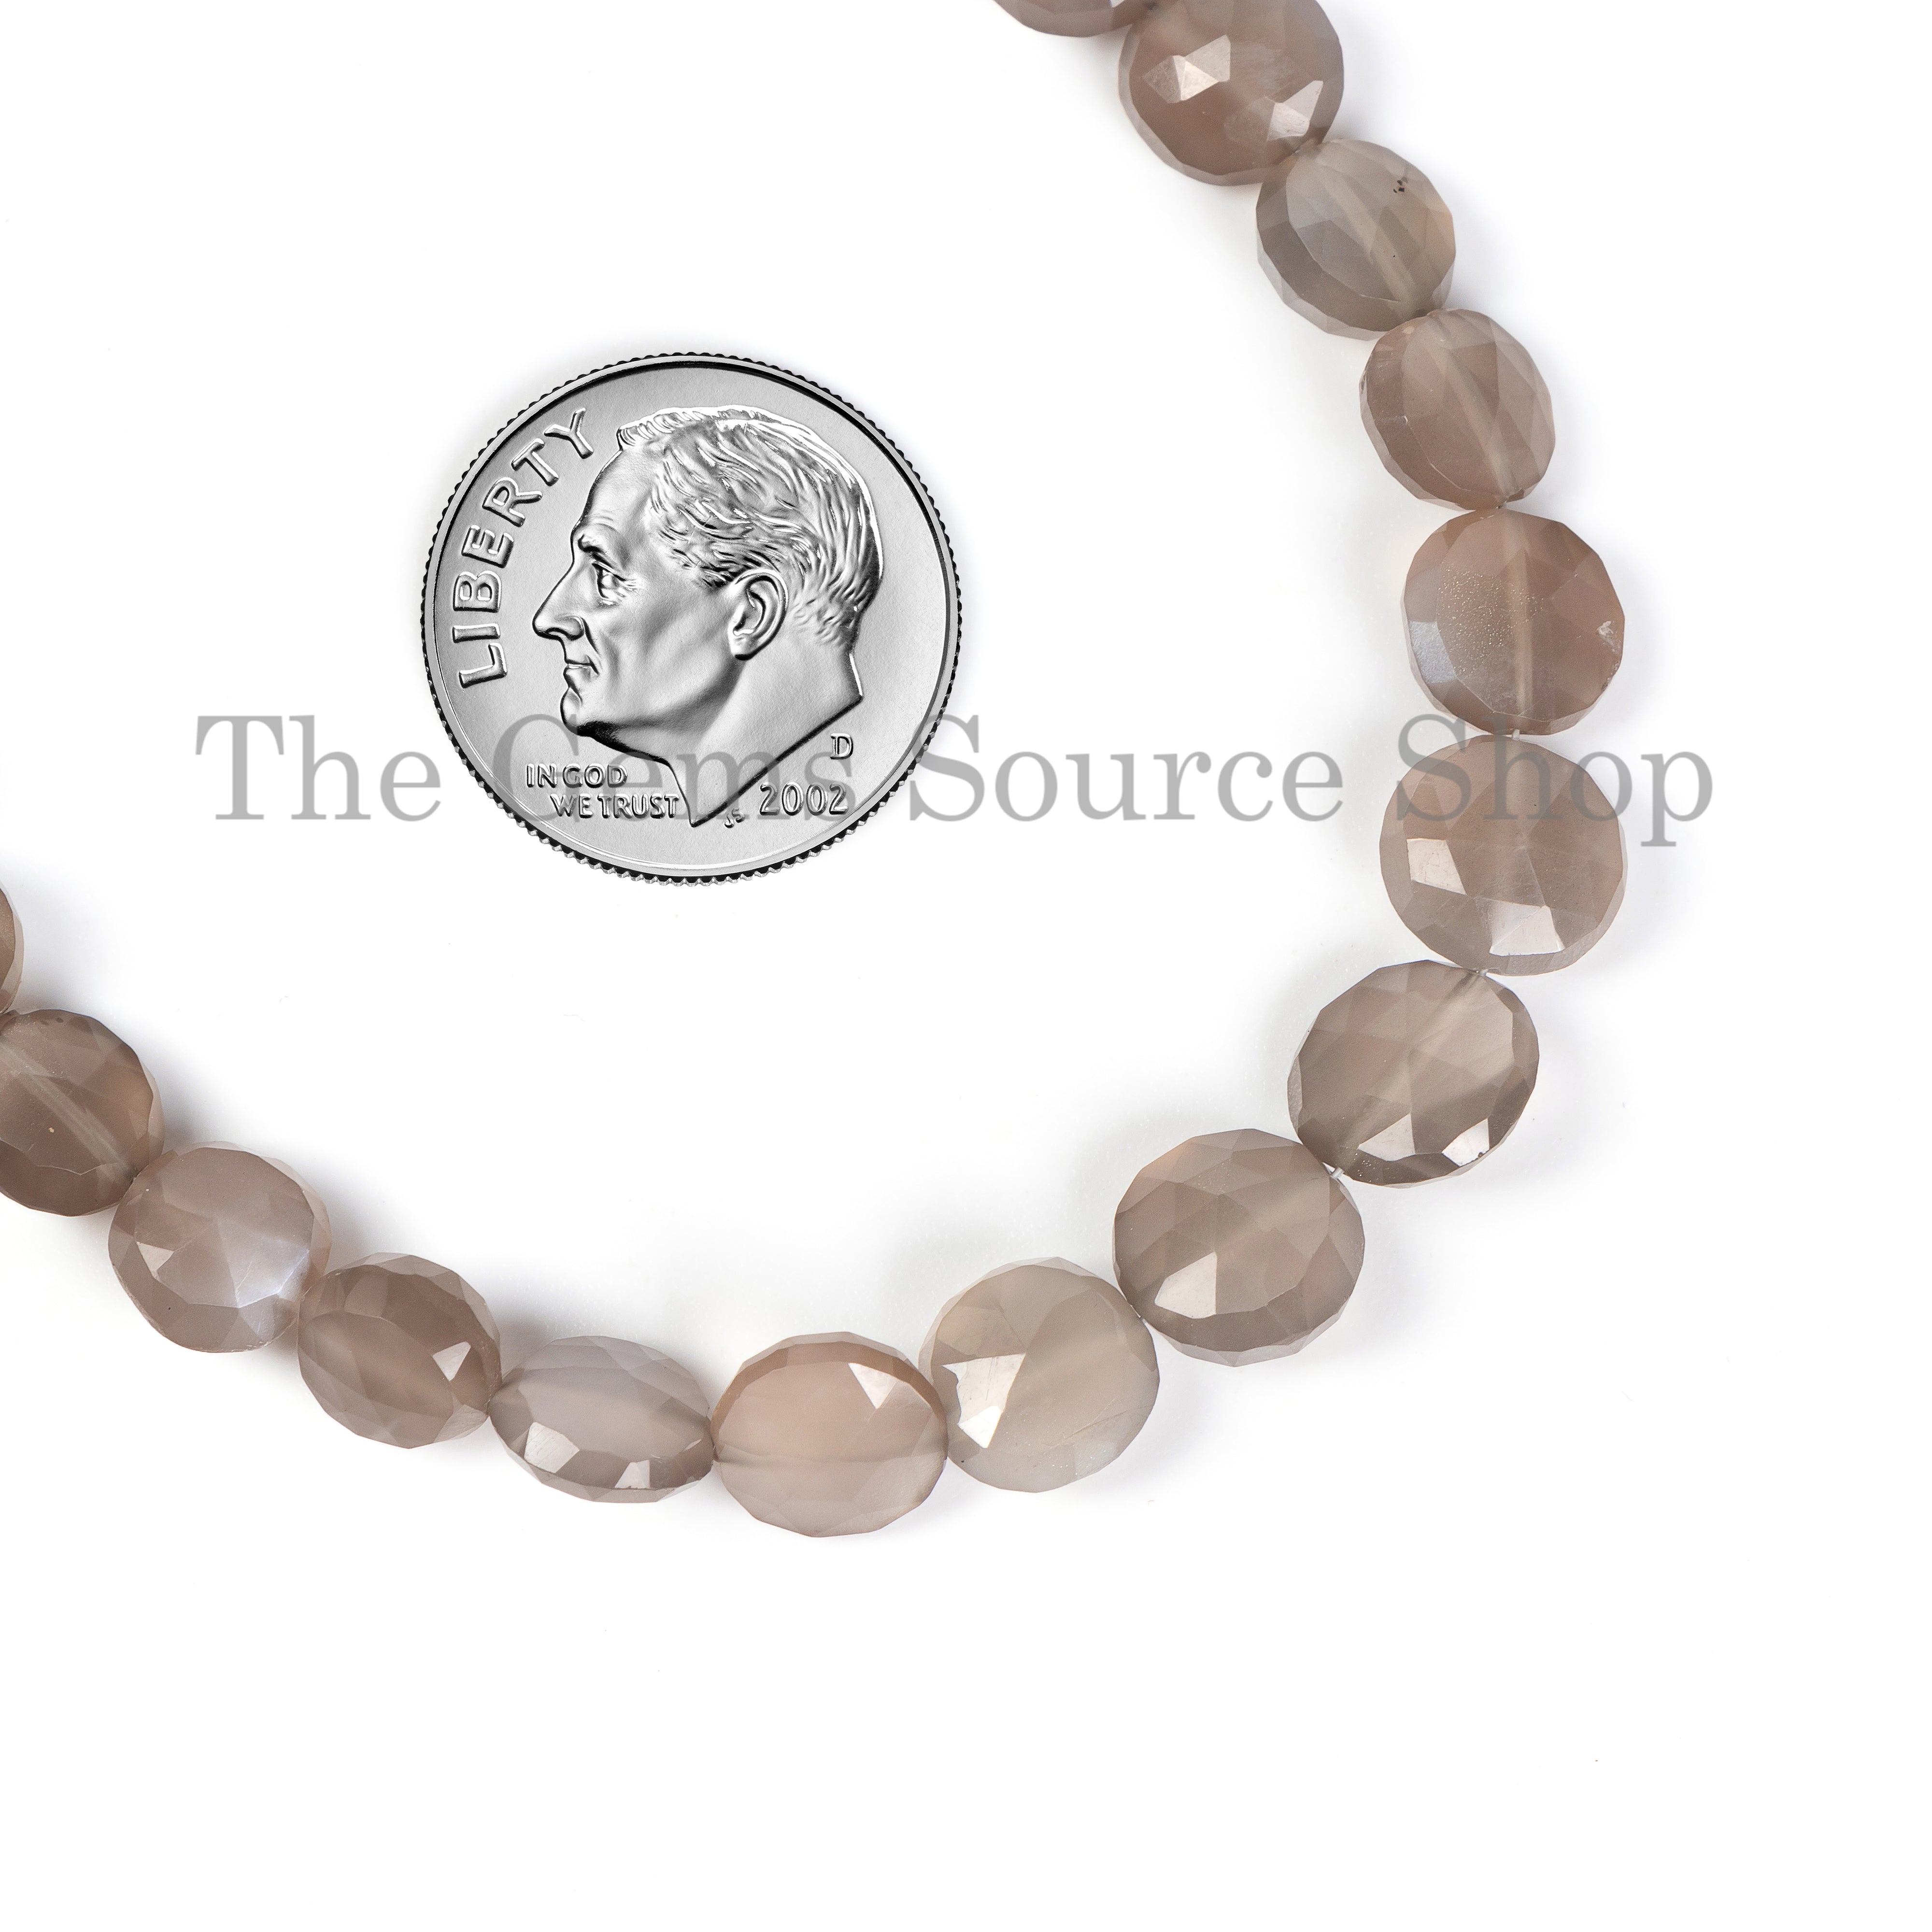 Natural Gray Moonstone Faceted Coin Shape Gemstone Beads for Jewelry Making.TGS-5098